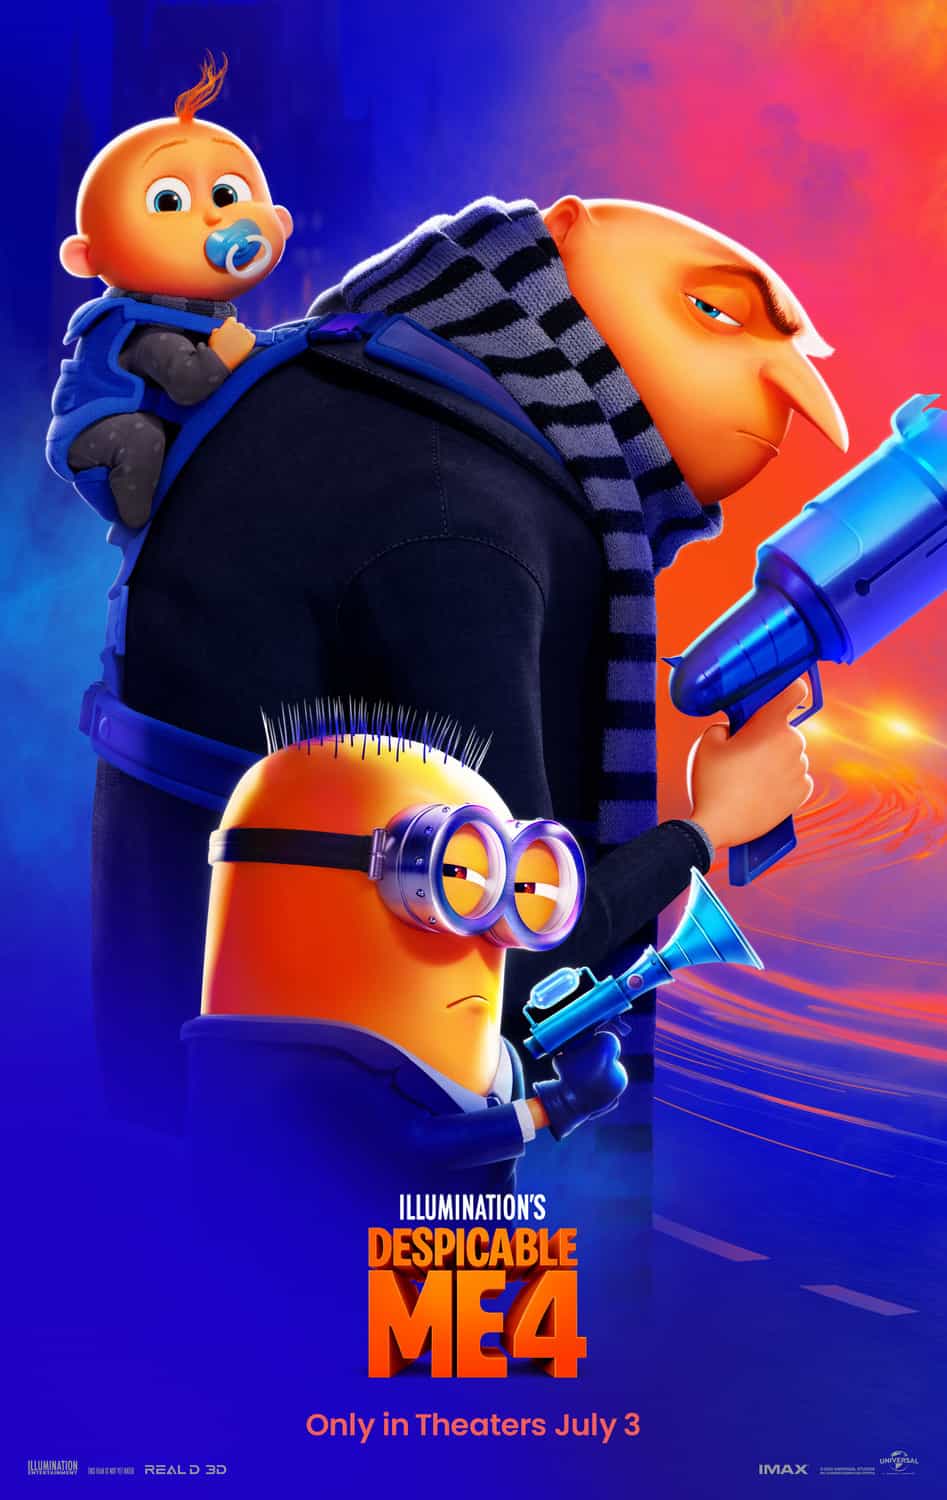 New poster has been released for Despicable Me 4 which stars Steve Carell and Kristen Wiig - movie UK release date 5th July 2024 #despicableme4